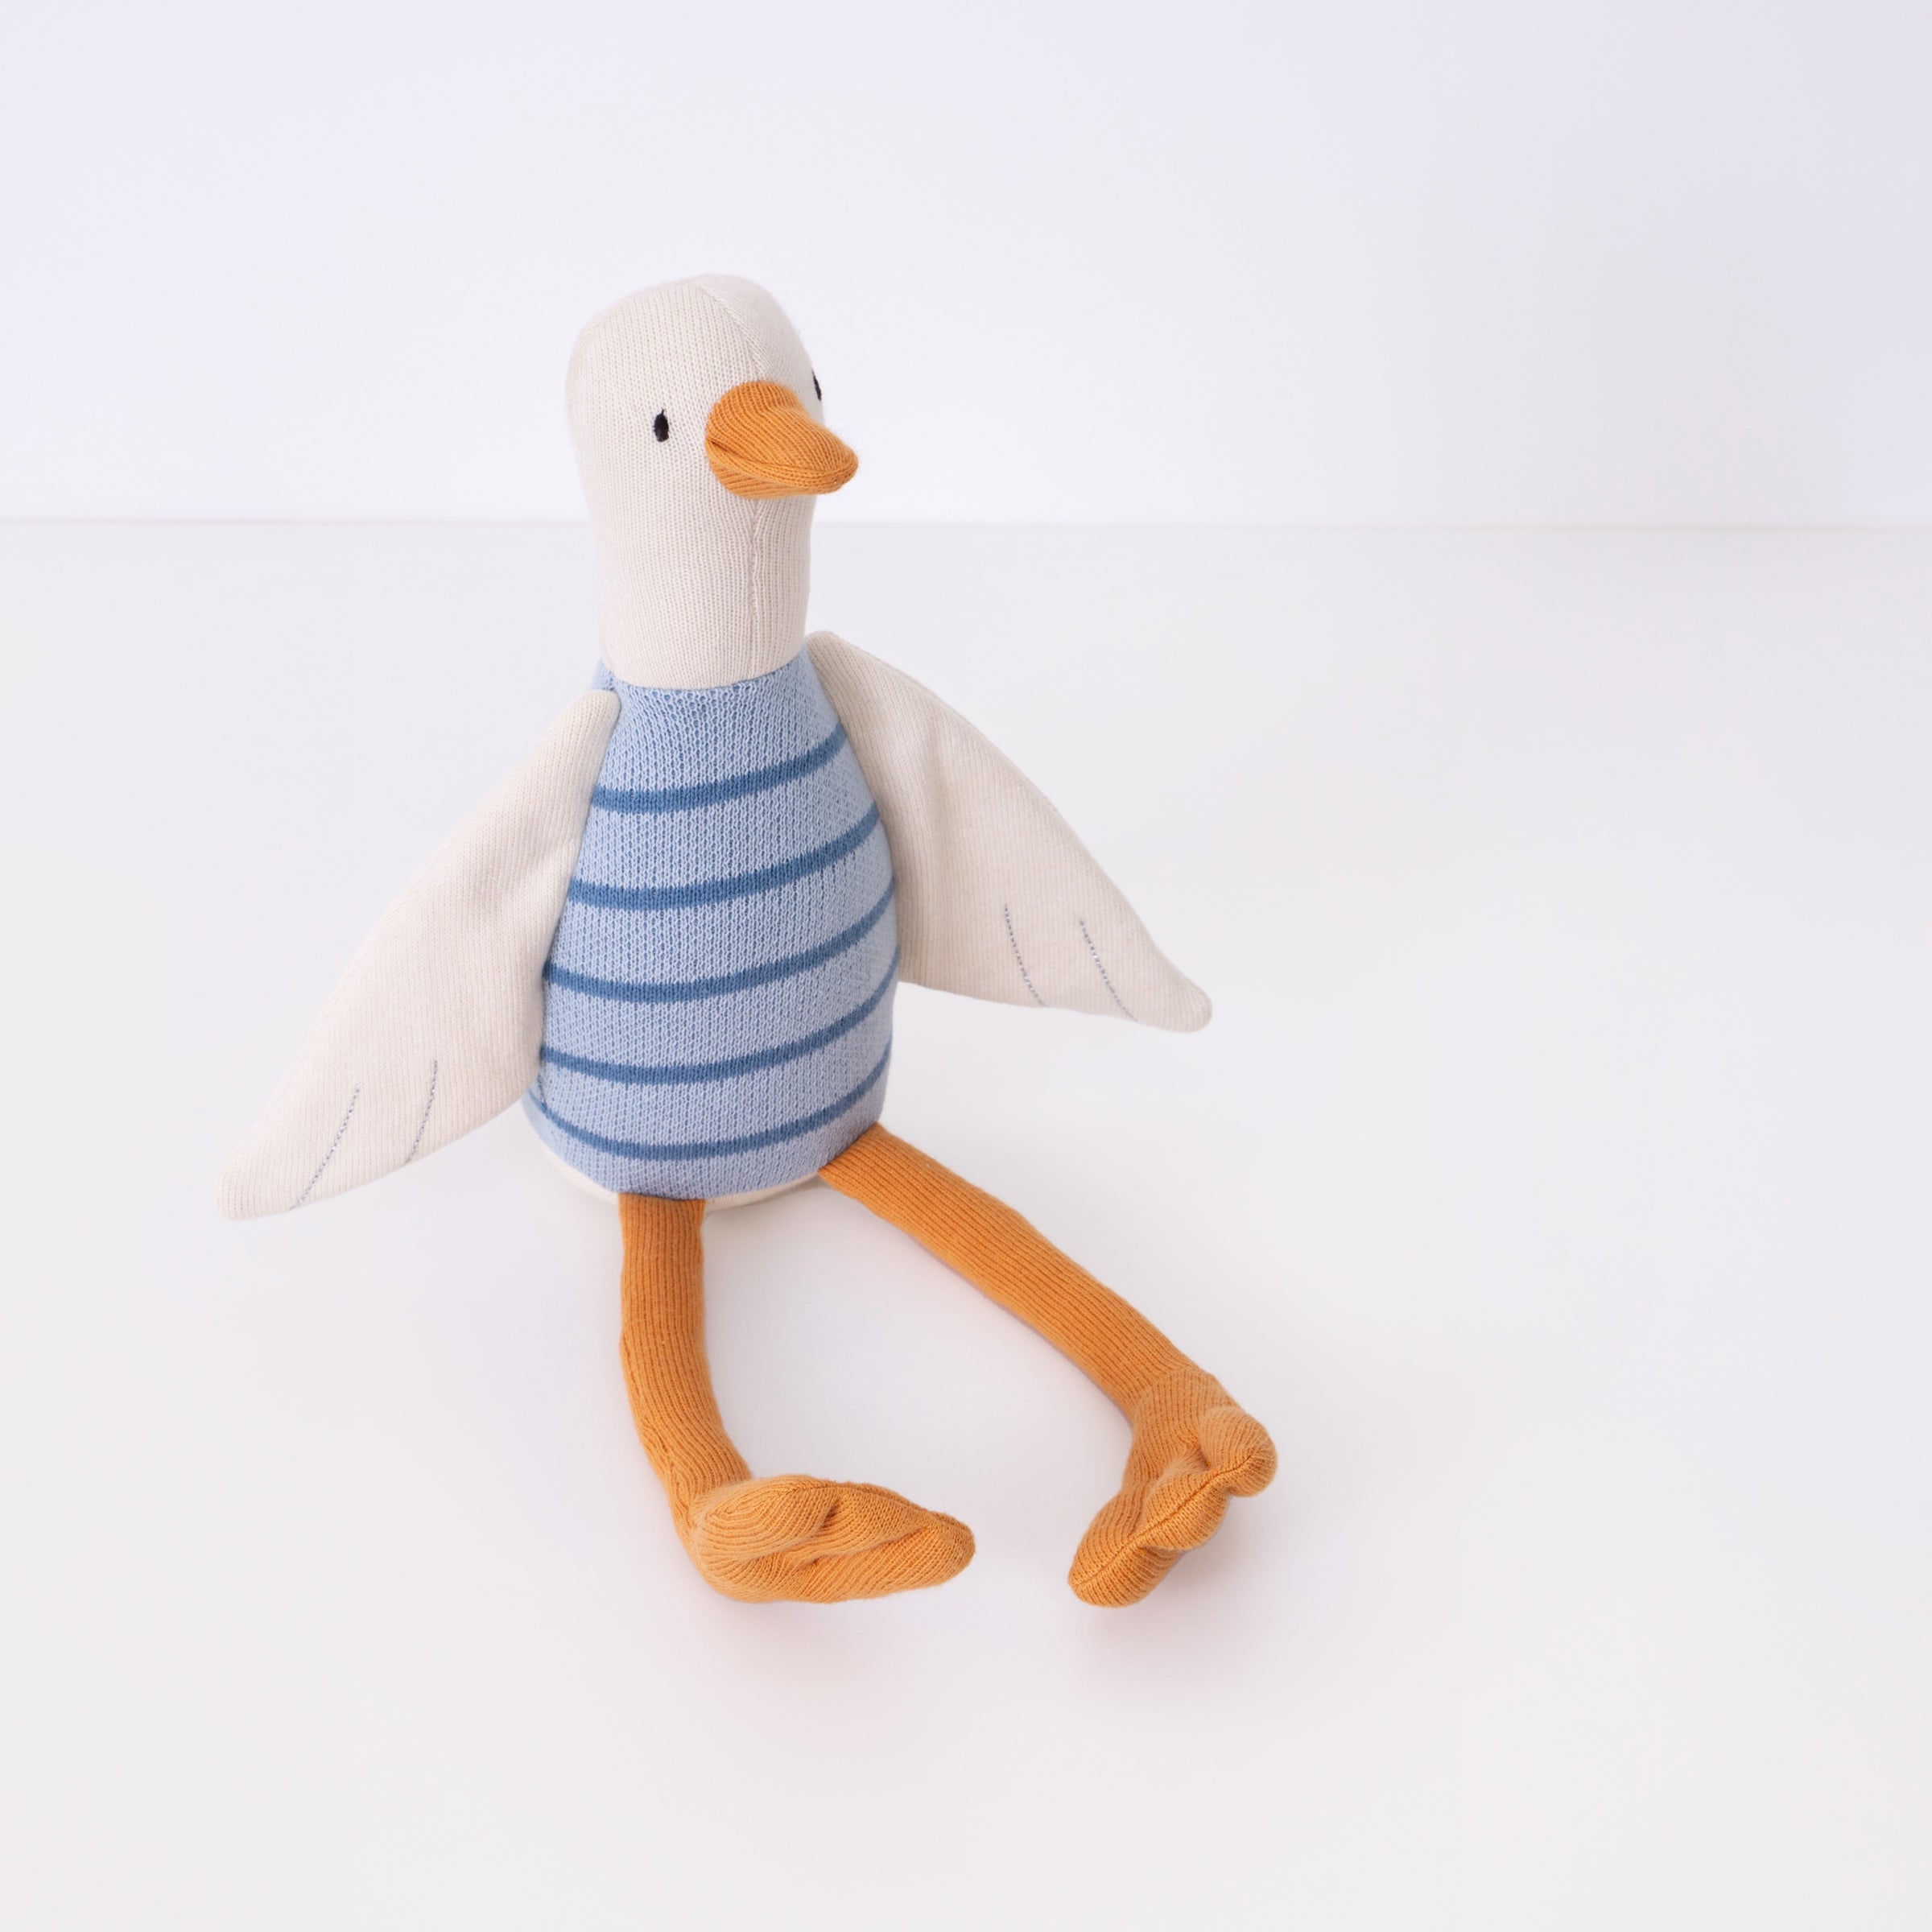 This adorable duck soft toy is an organic cotton toy, with sweet details.